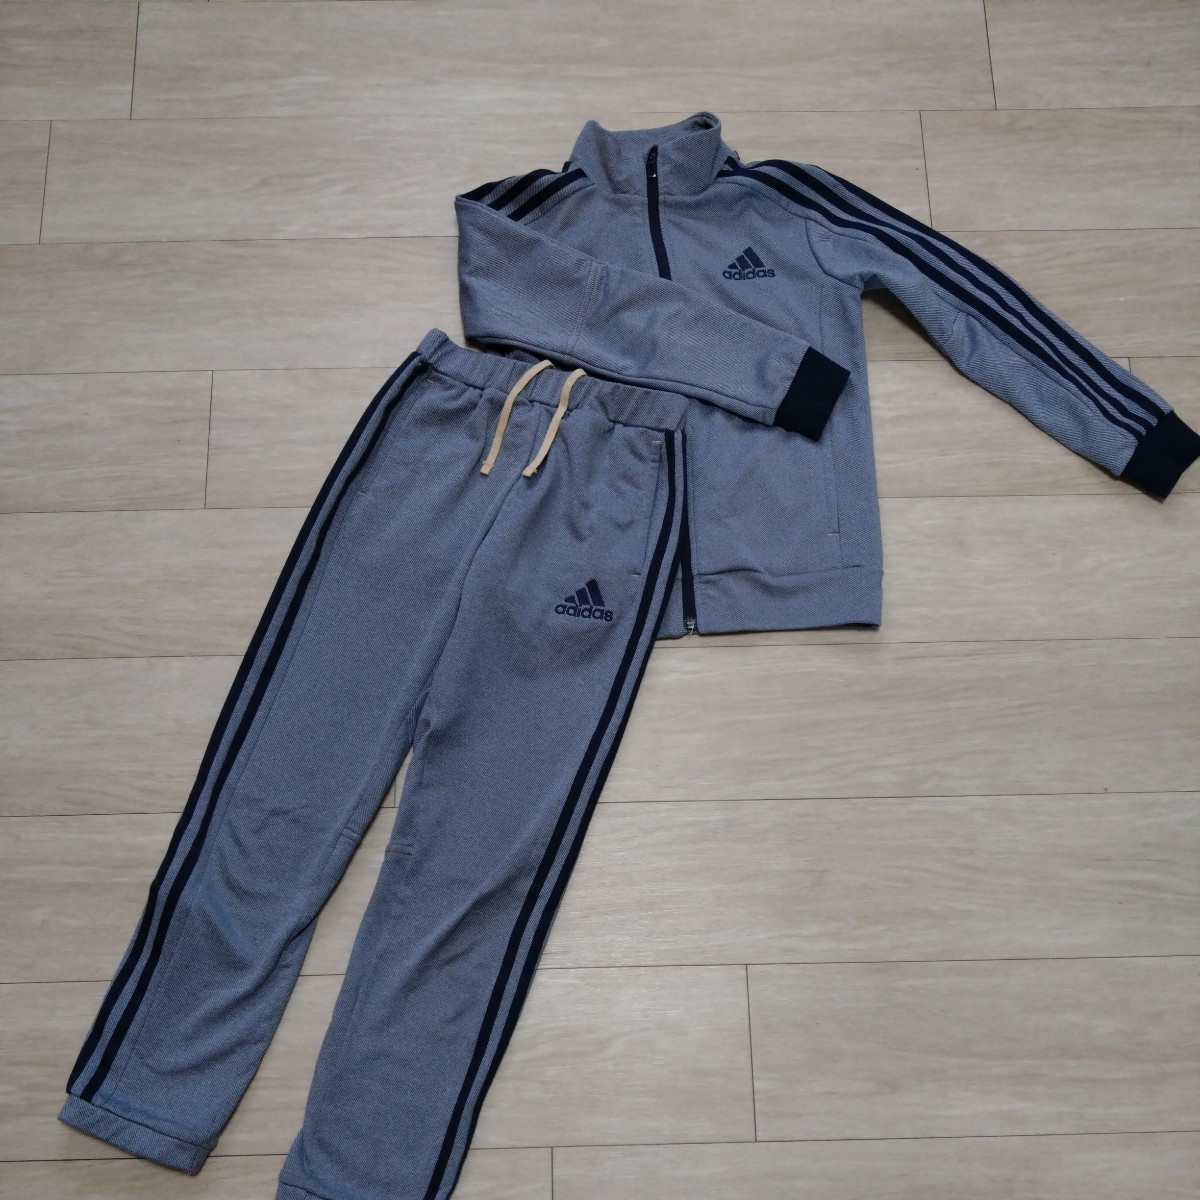 adidas top and bottom set jersey top and bottom CLIMALITE 140 Denim color 